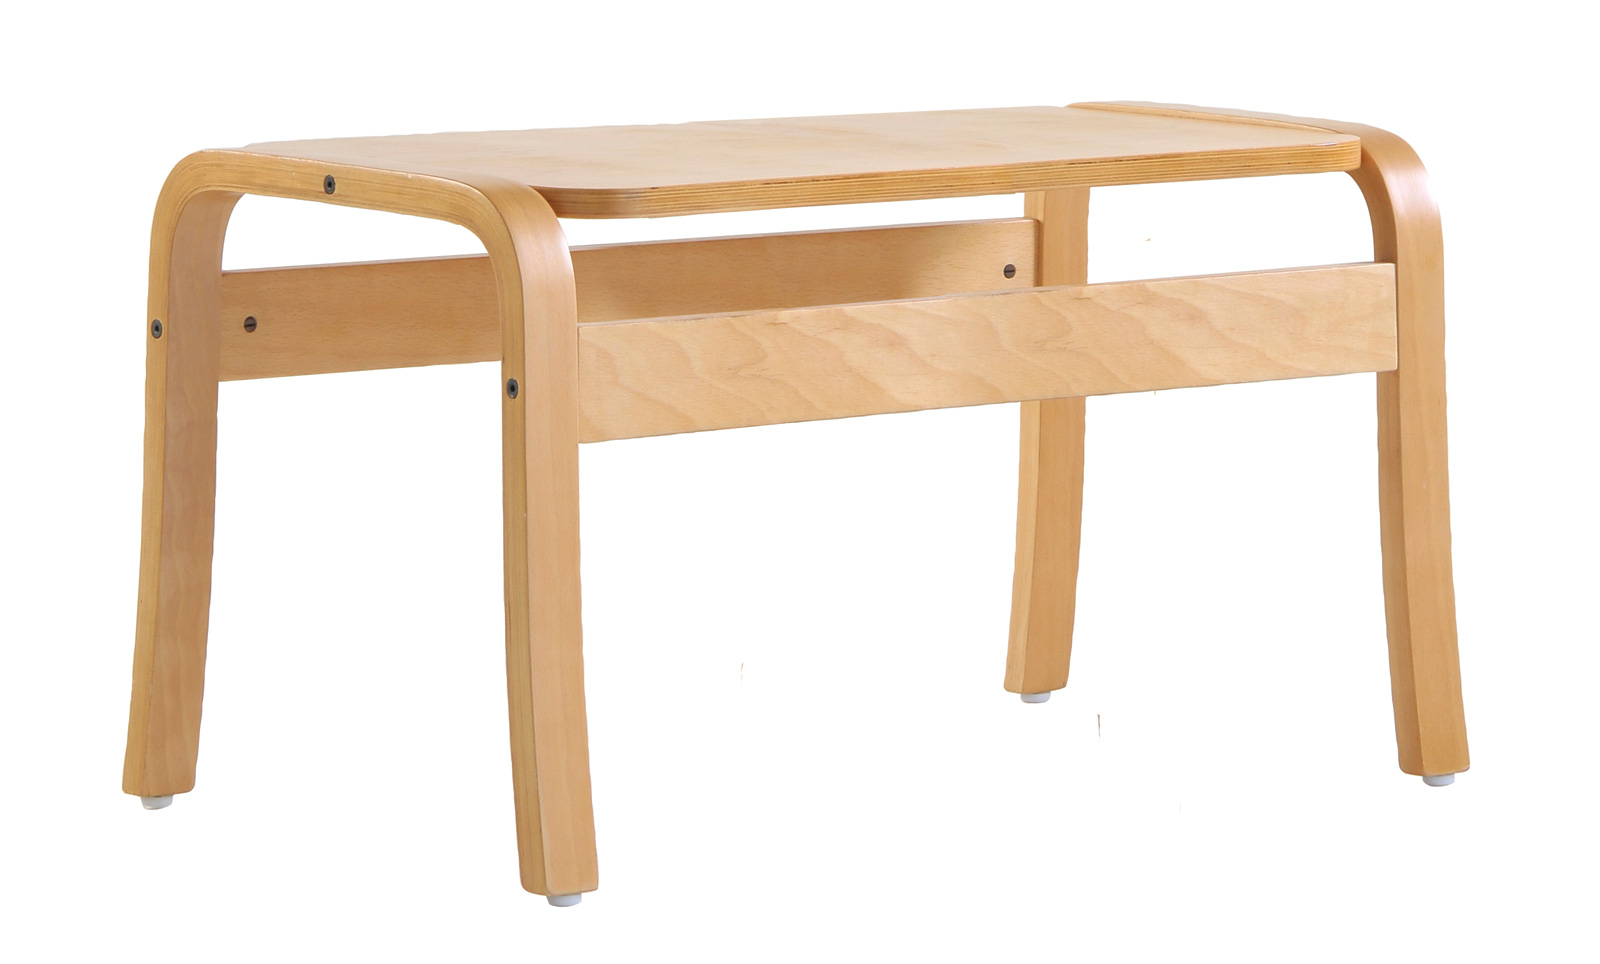 Yealm modular wooden frame reception table